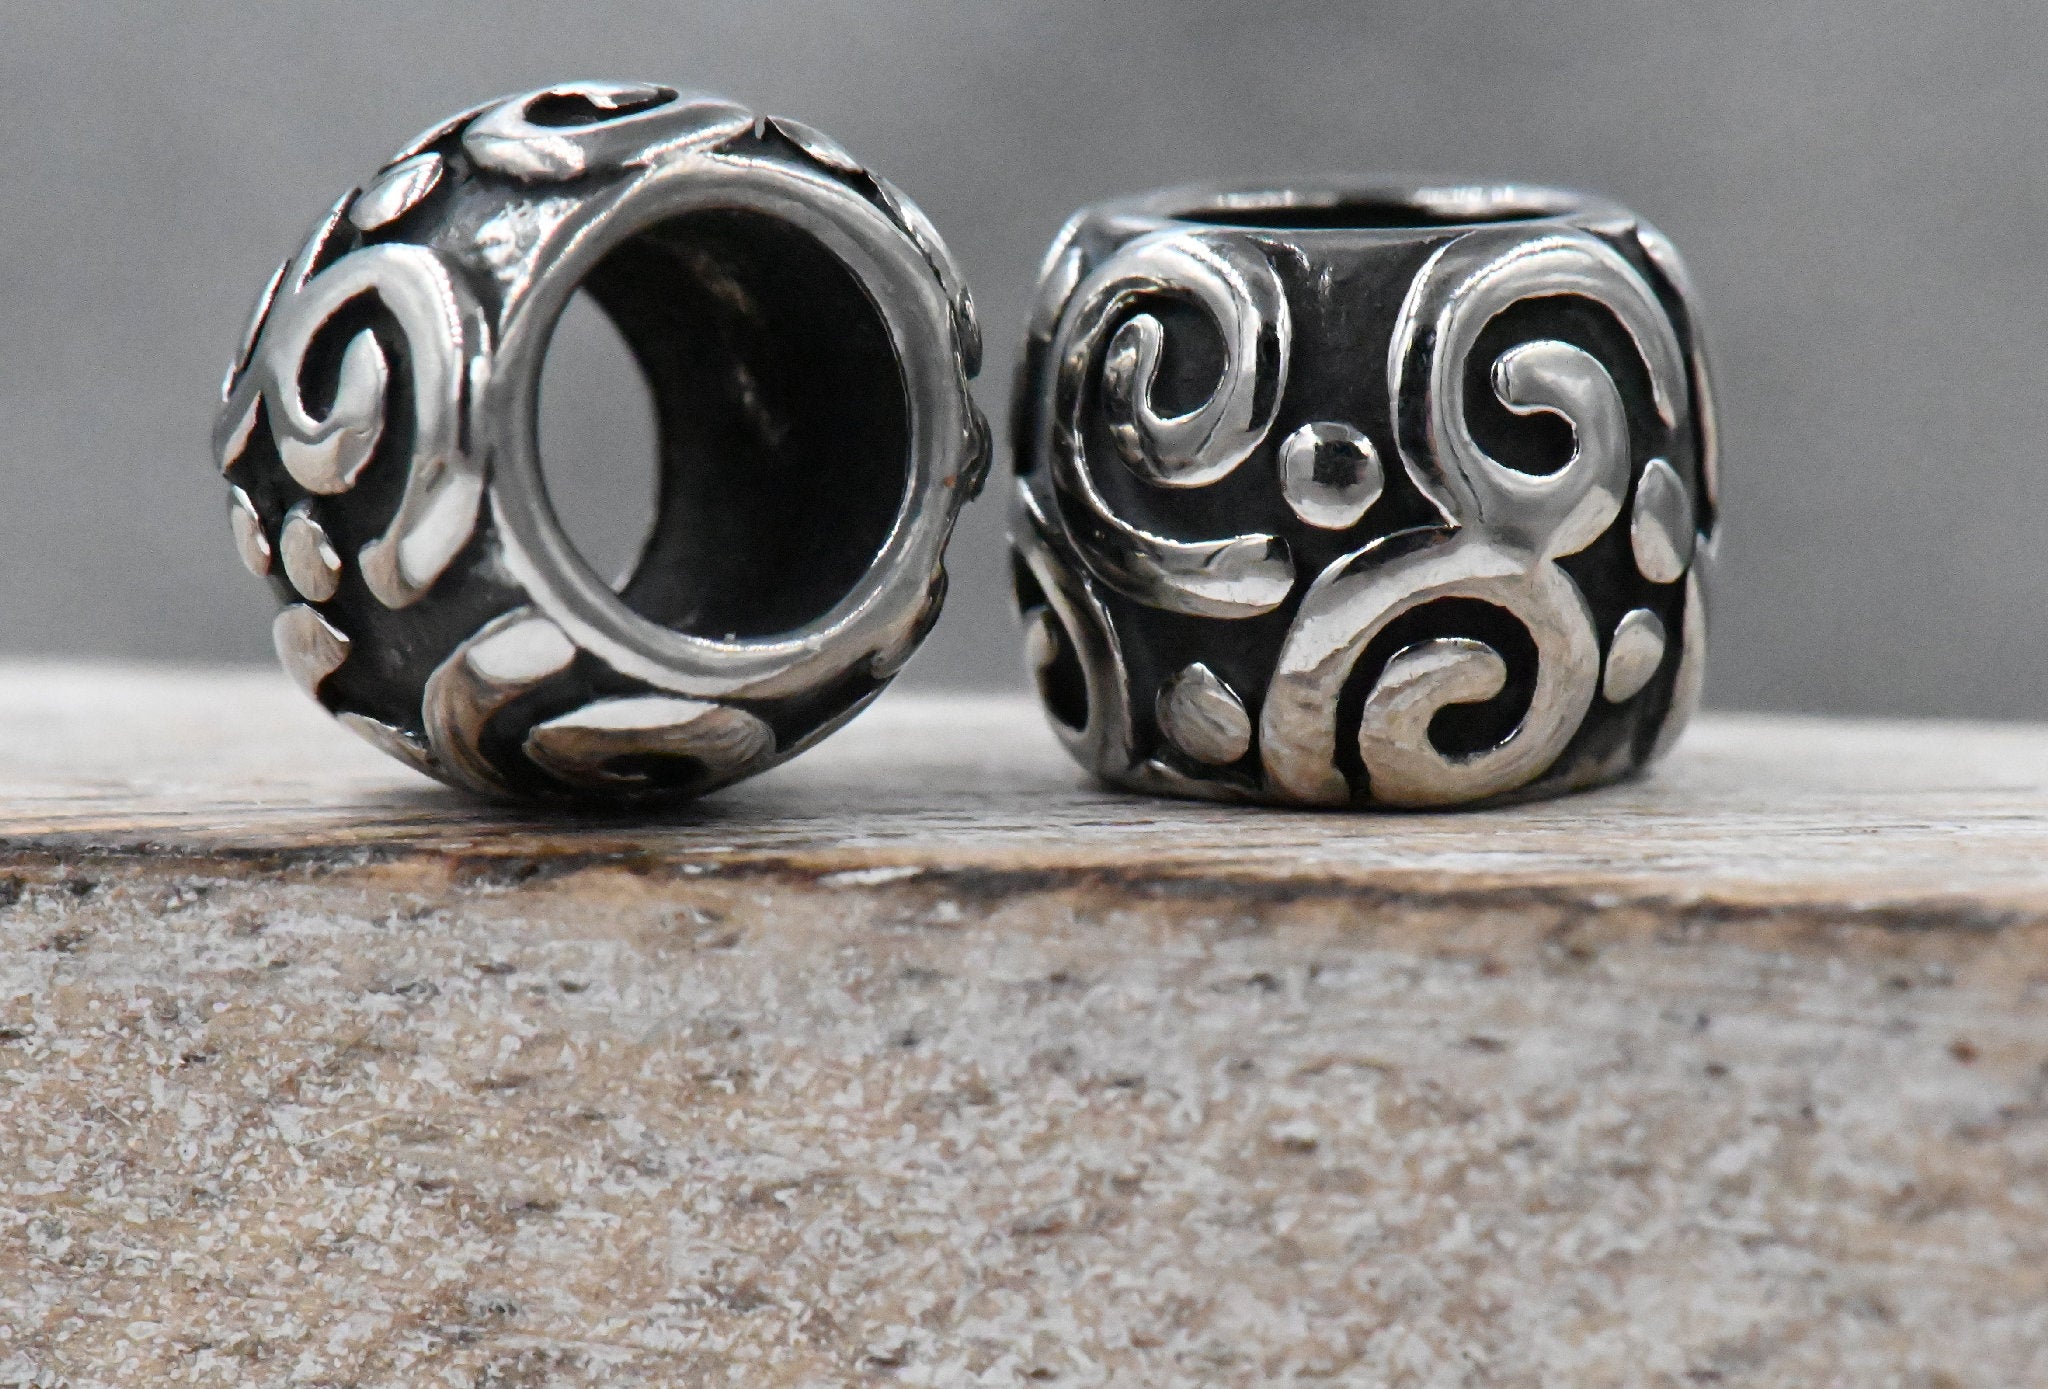 Large Hole Beads, 304 Stainless Steel Spacer Beads, 1pc Column, Swirl Antique Silver, 9.7x10.8mm